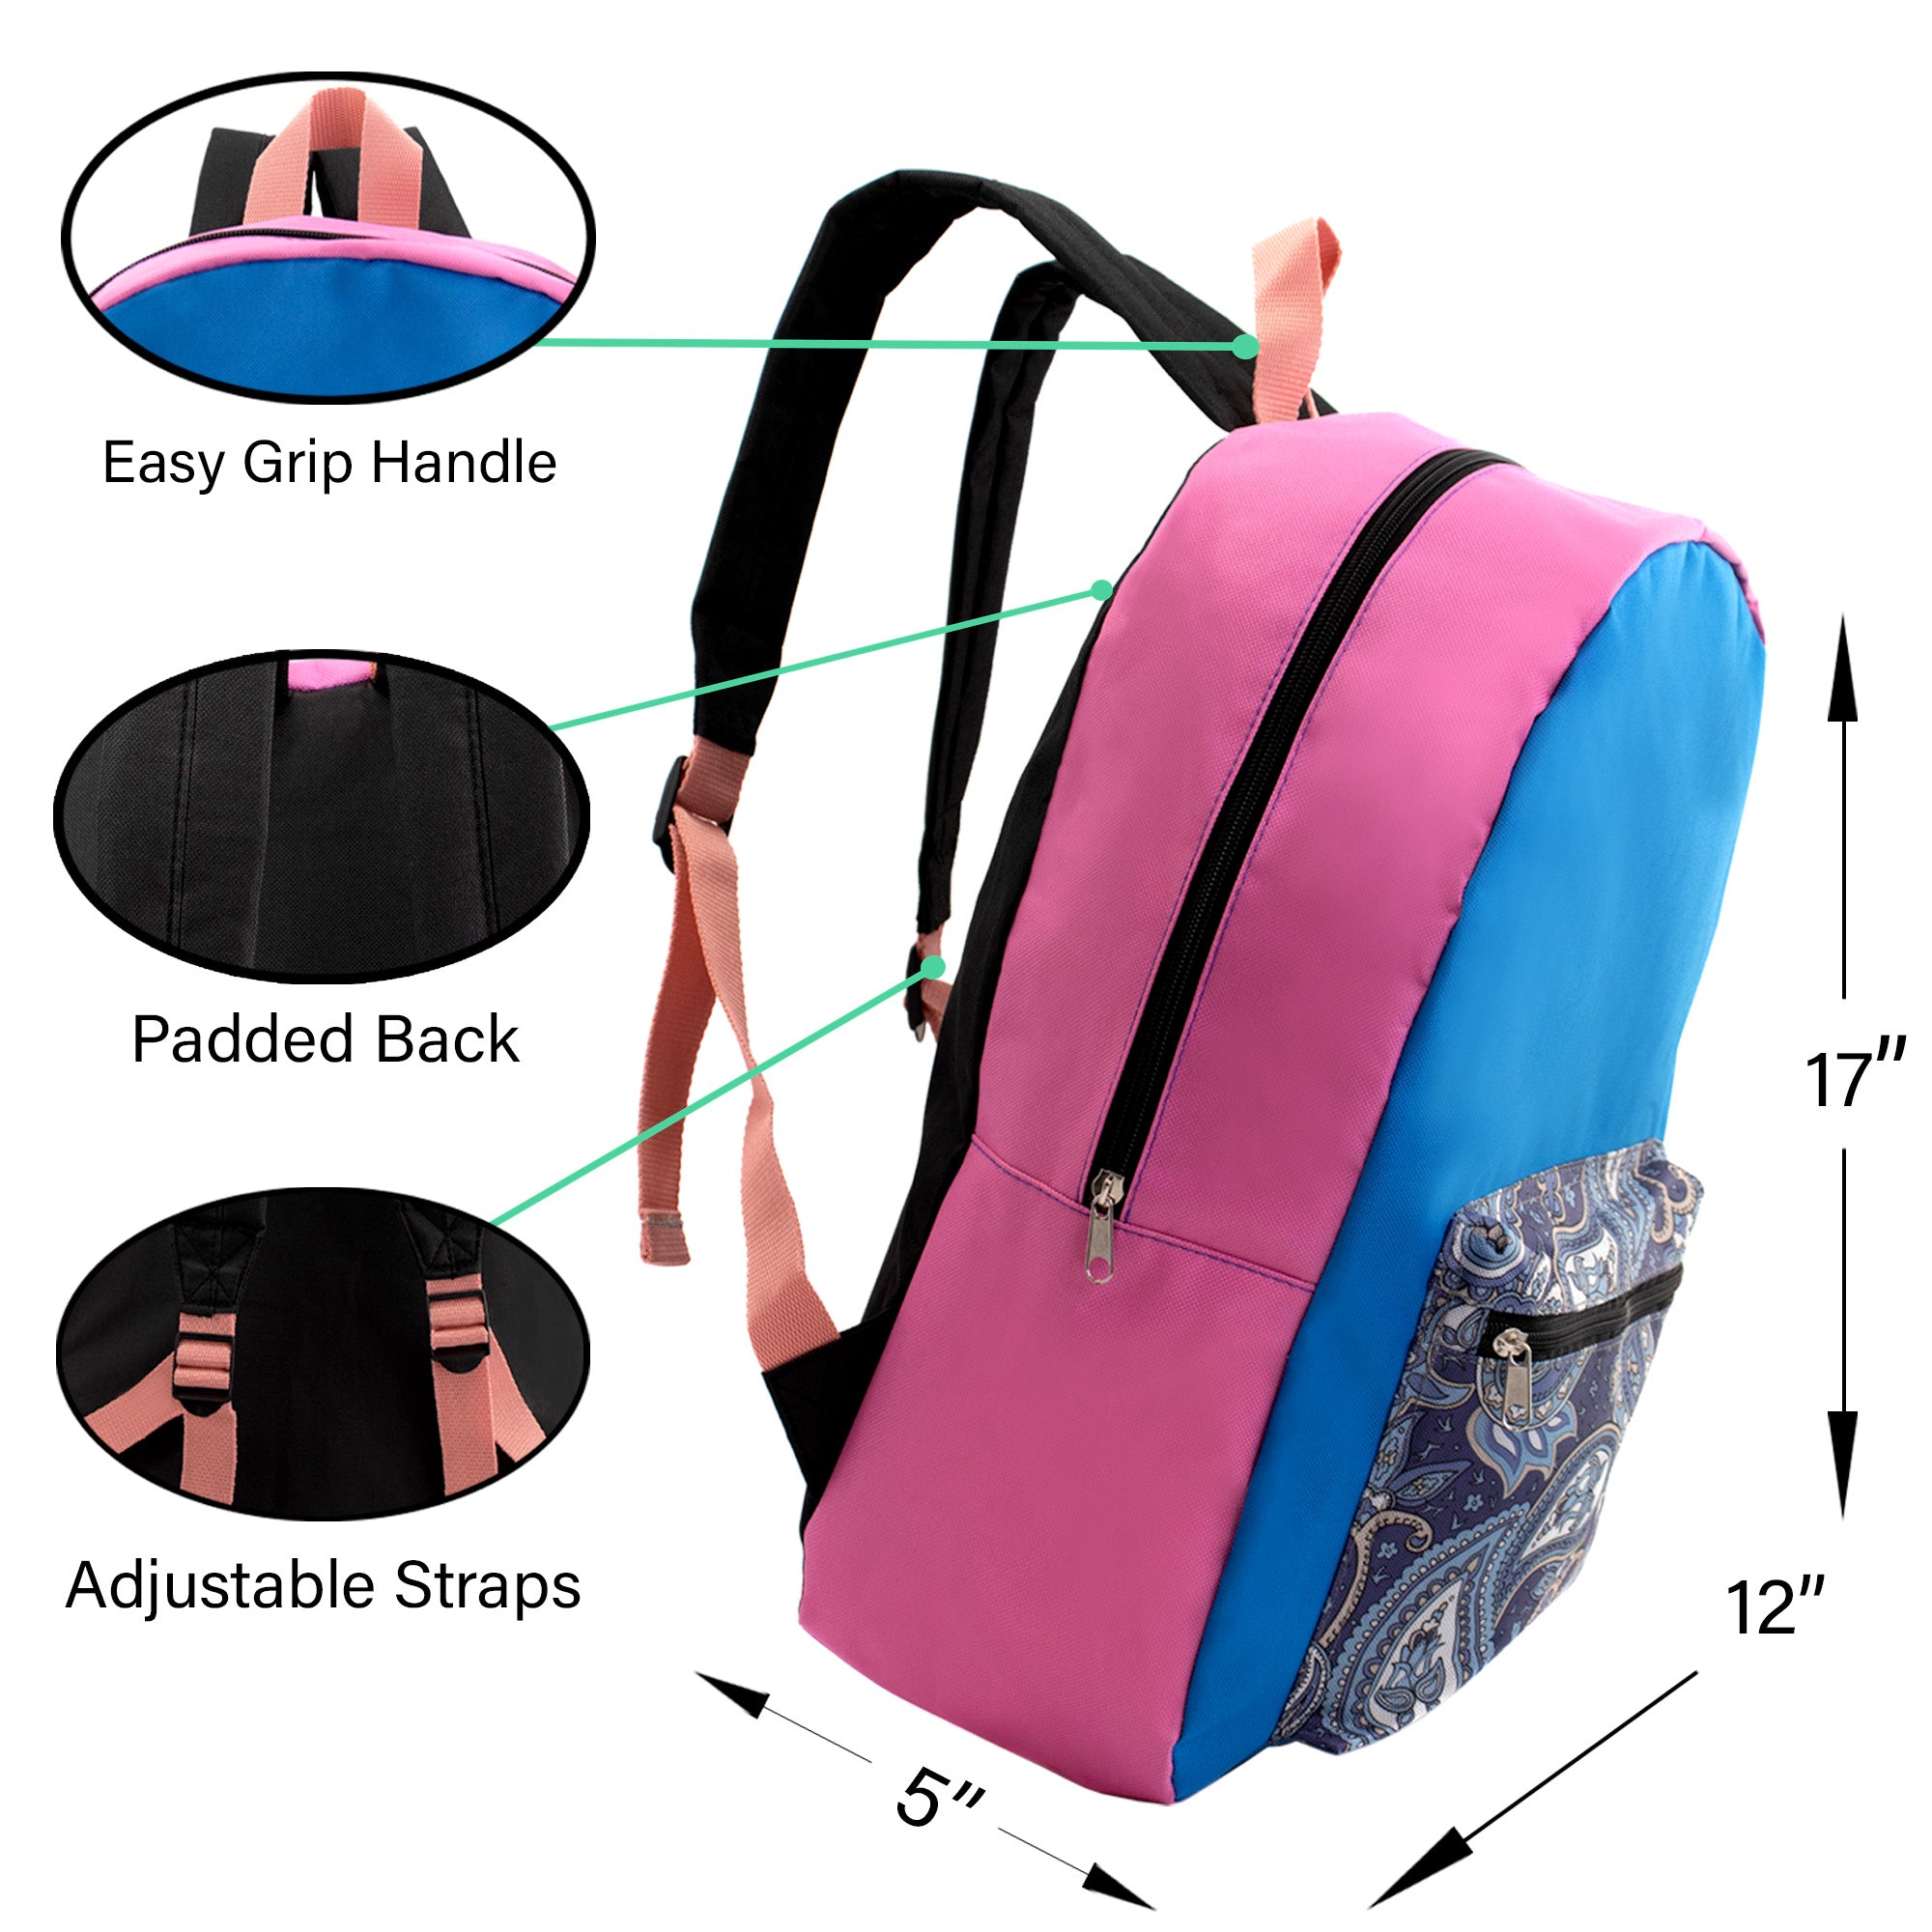 17" Kids Basic Wholesale Backpack in Randomly Assorted Solid Colors with Prints - Bulk Case of 24